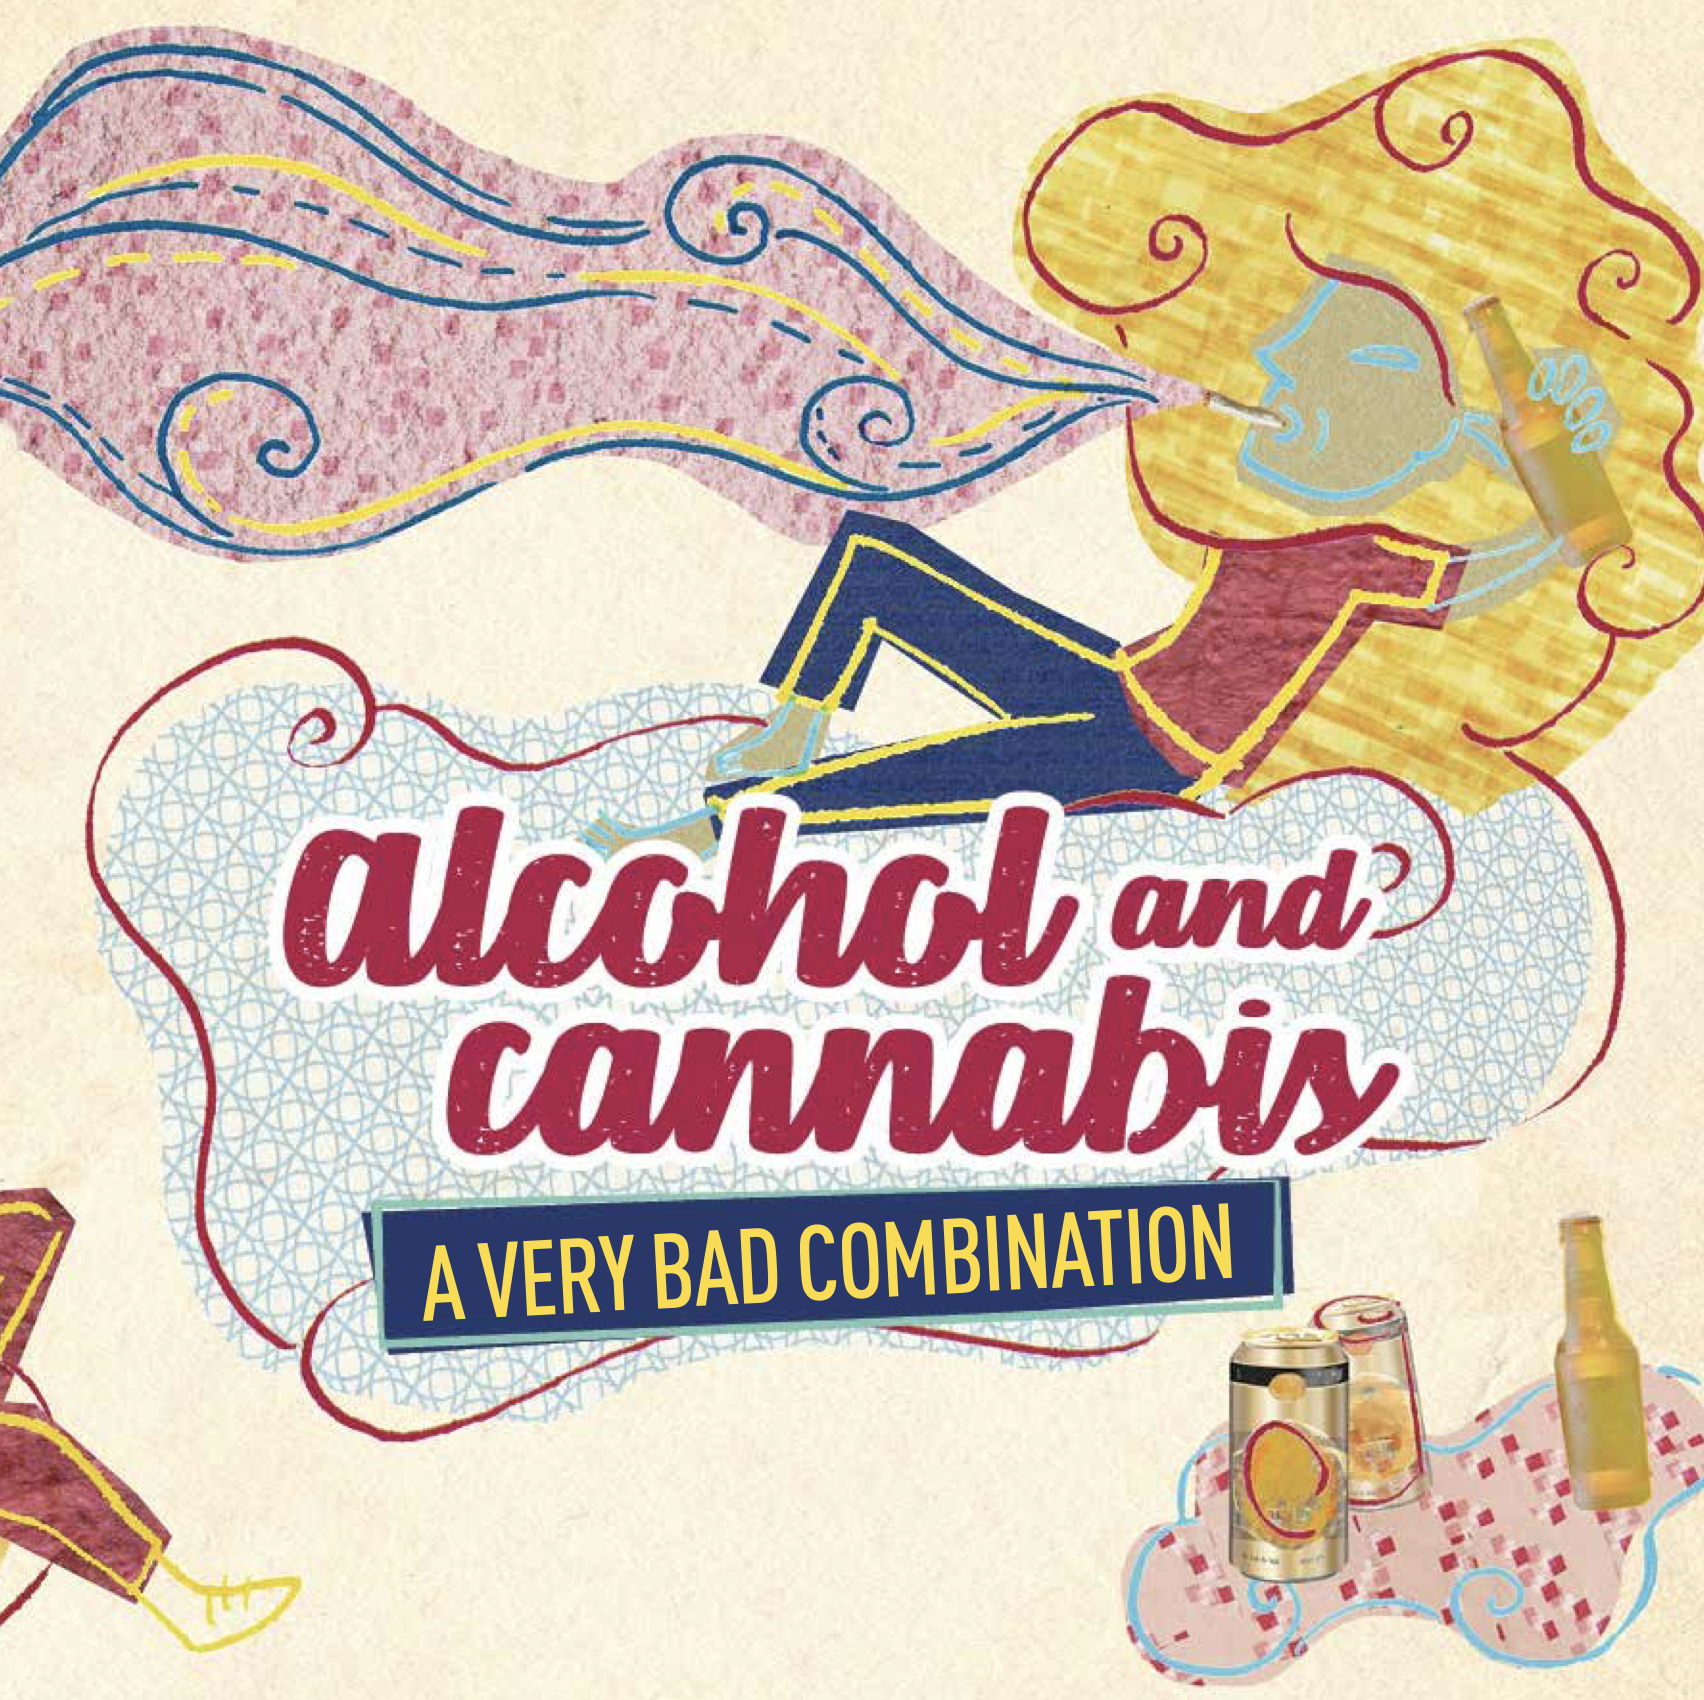 Alcohol and Cannabis (youth)